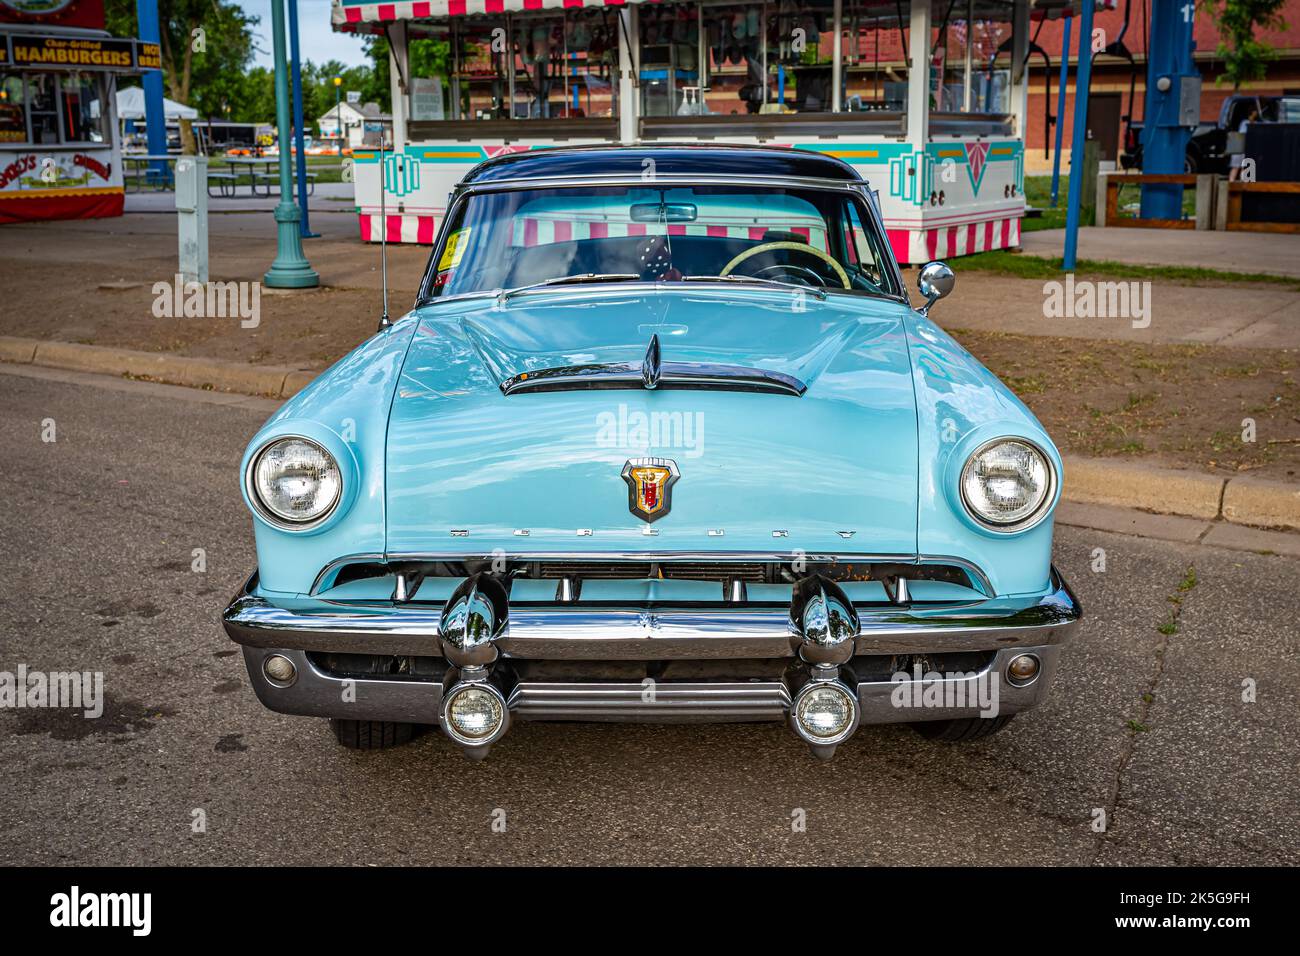 Falcon Heights, MN - June 19, 2022: High perspective front view of a 1953 Mercury Monterey Hardtop Coupe at a local car show. Stock Photo